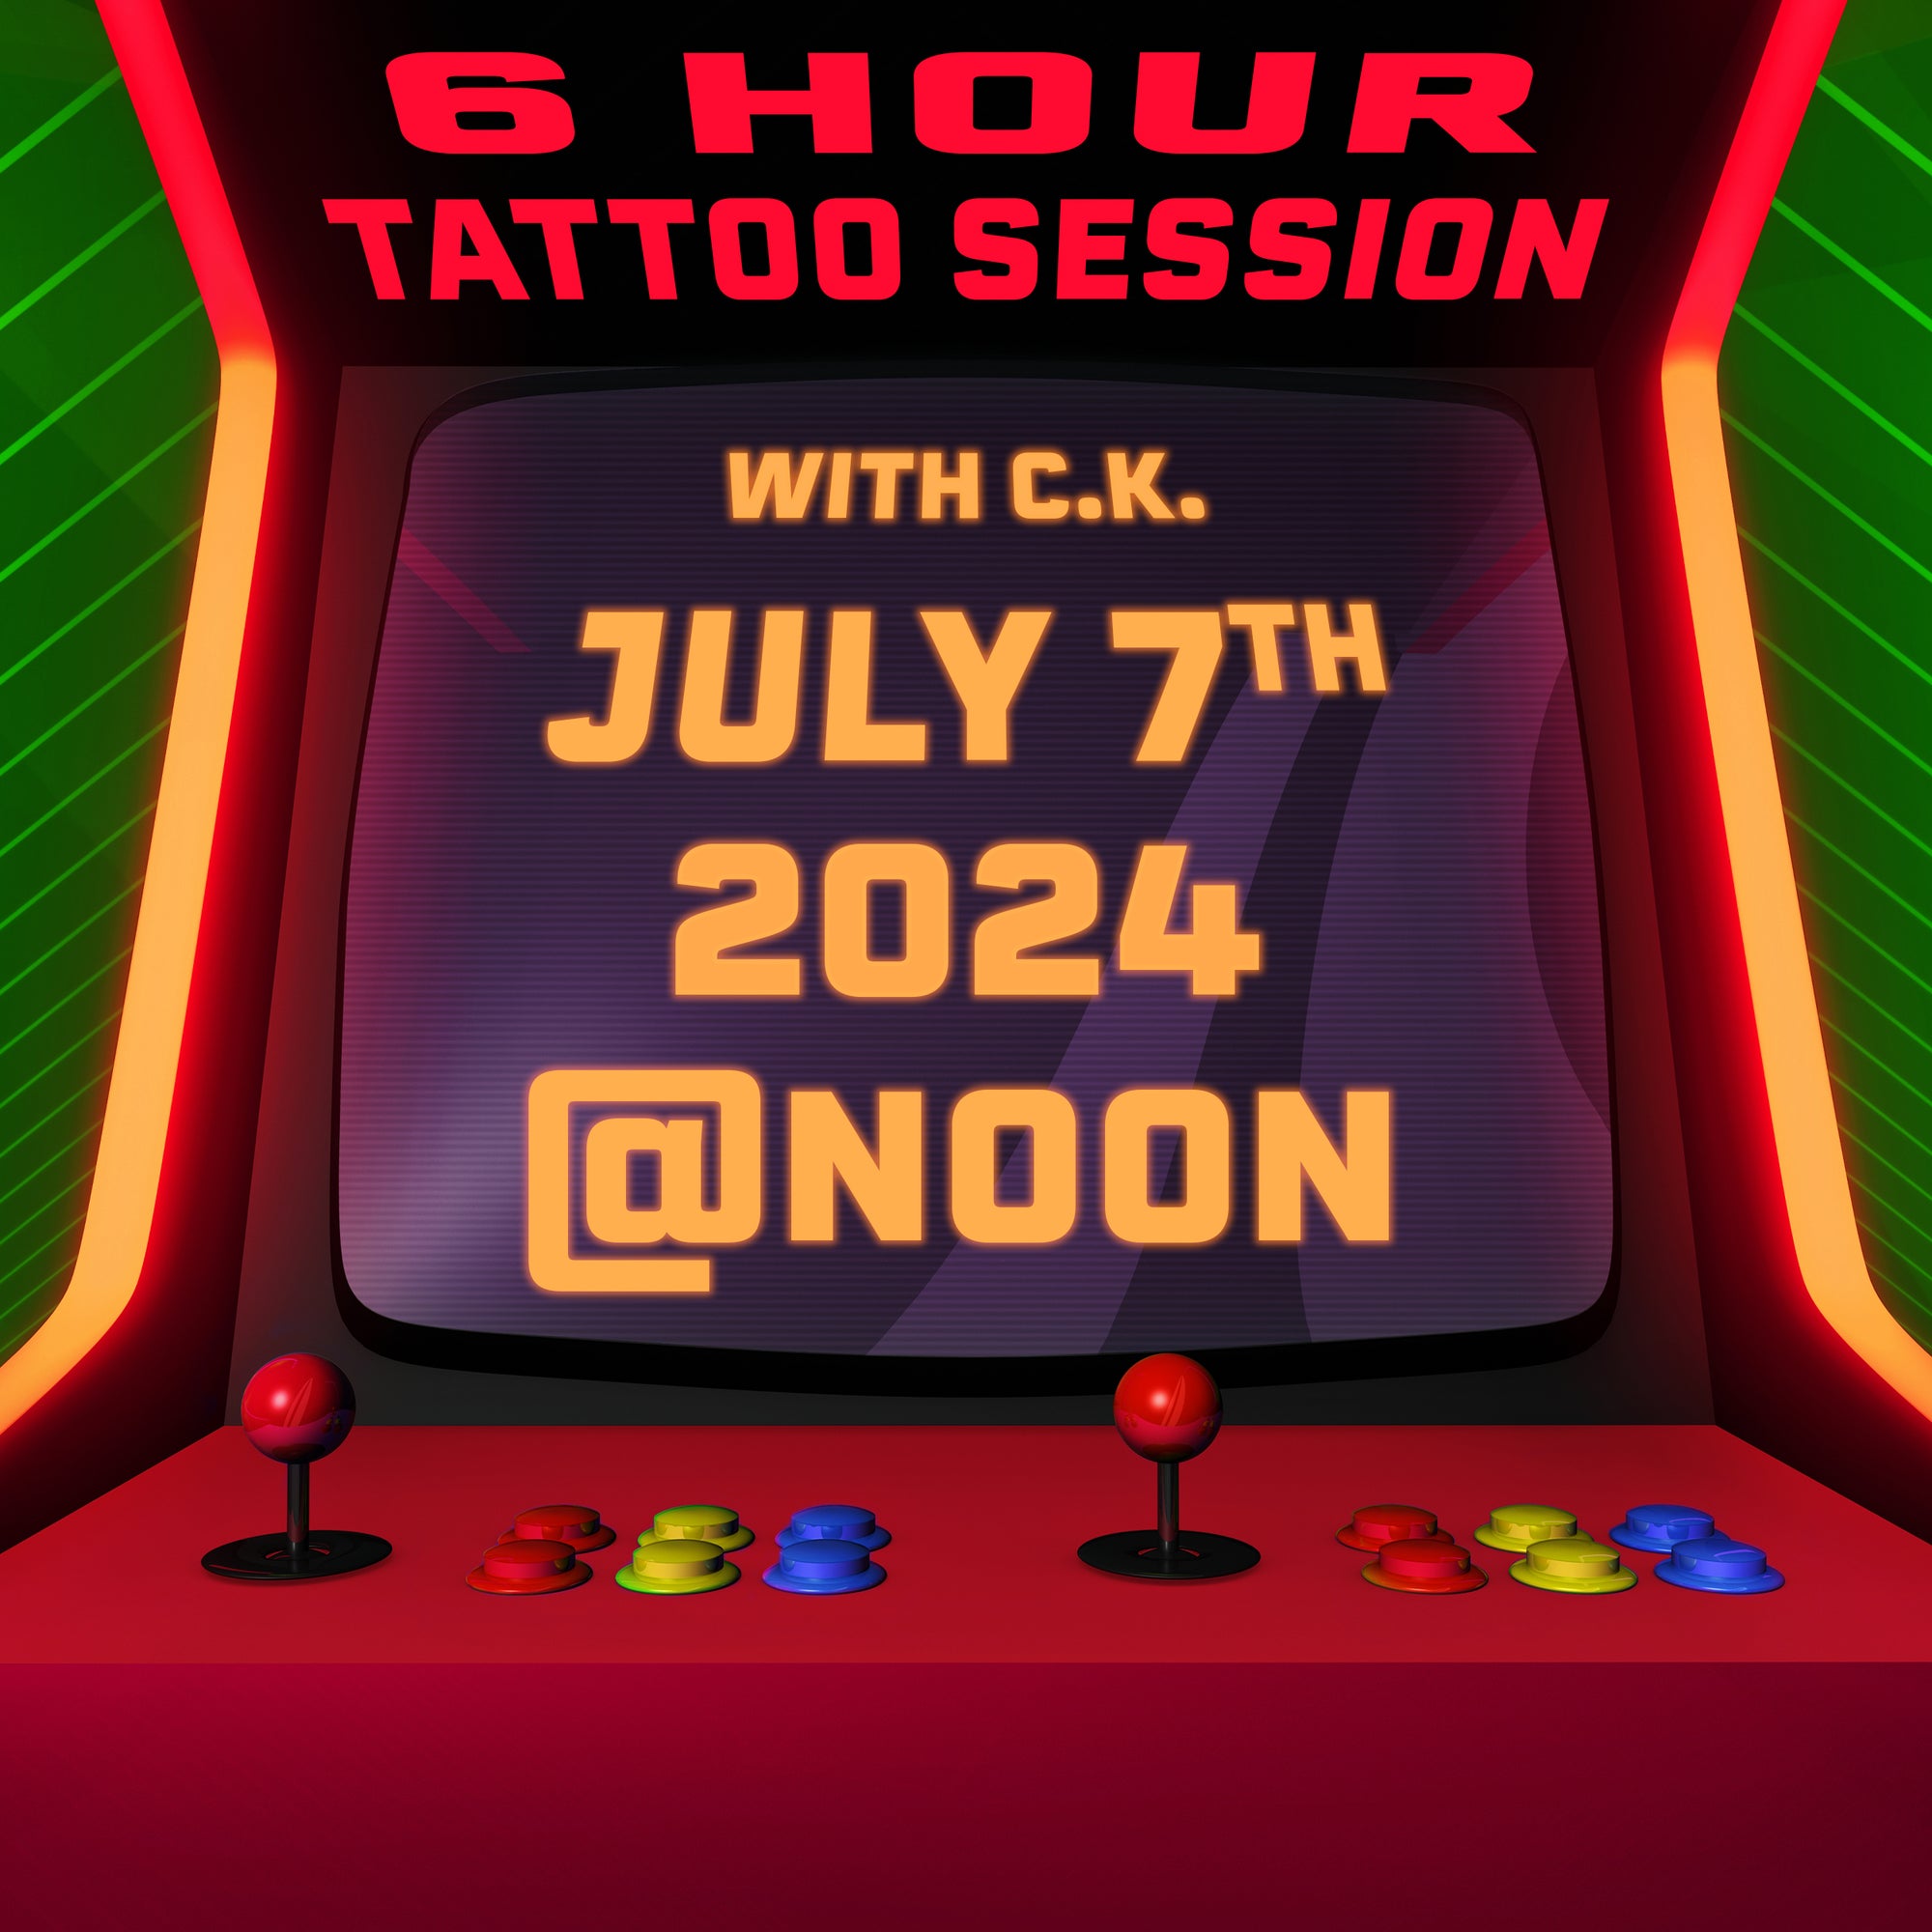 6 hour Tattoo Session with CK July 7th, 2024